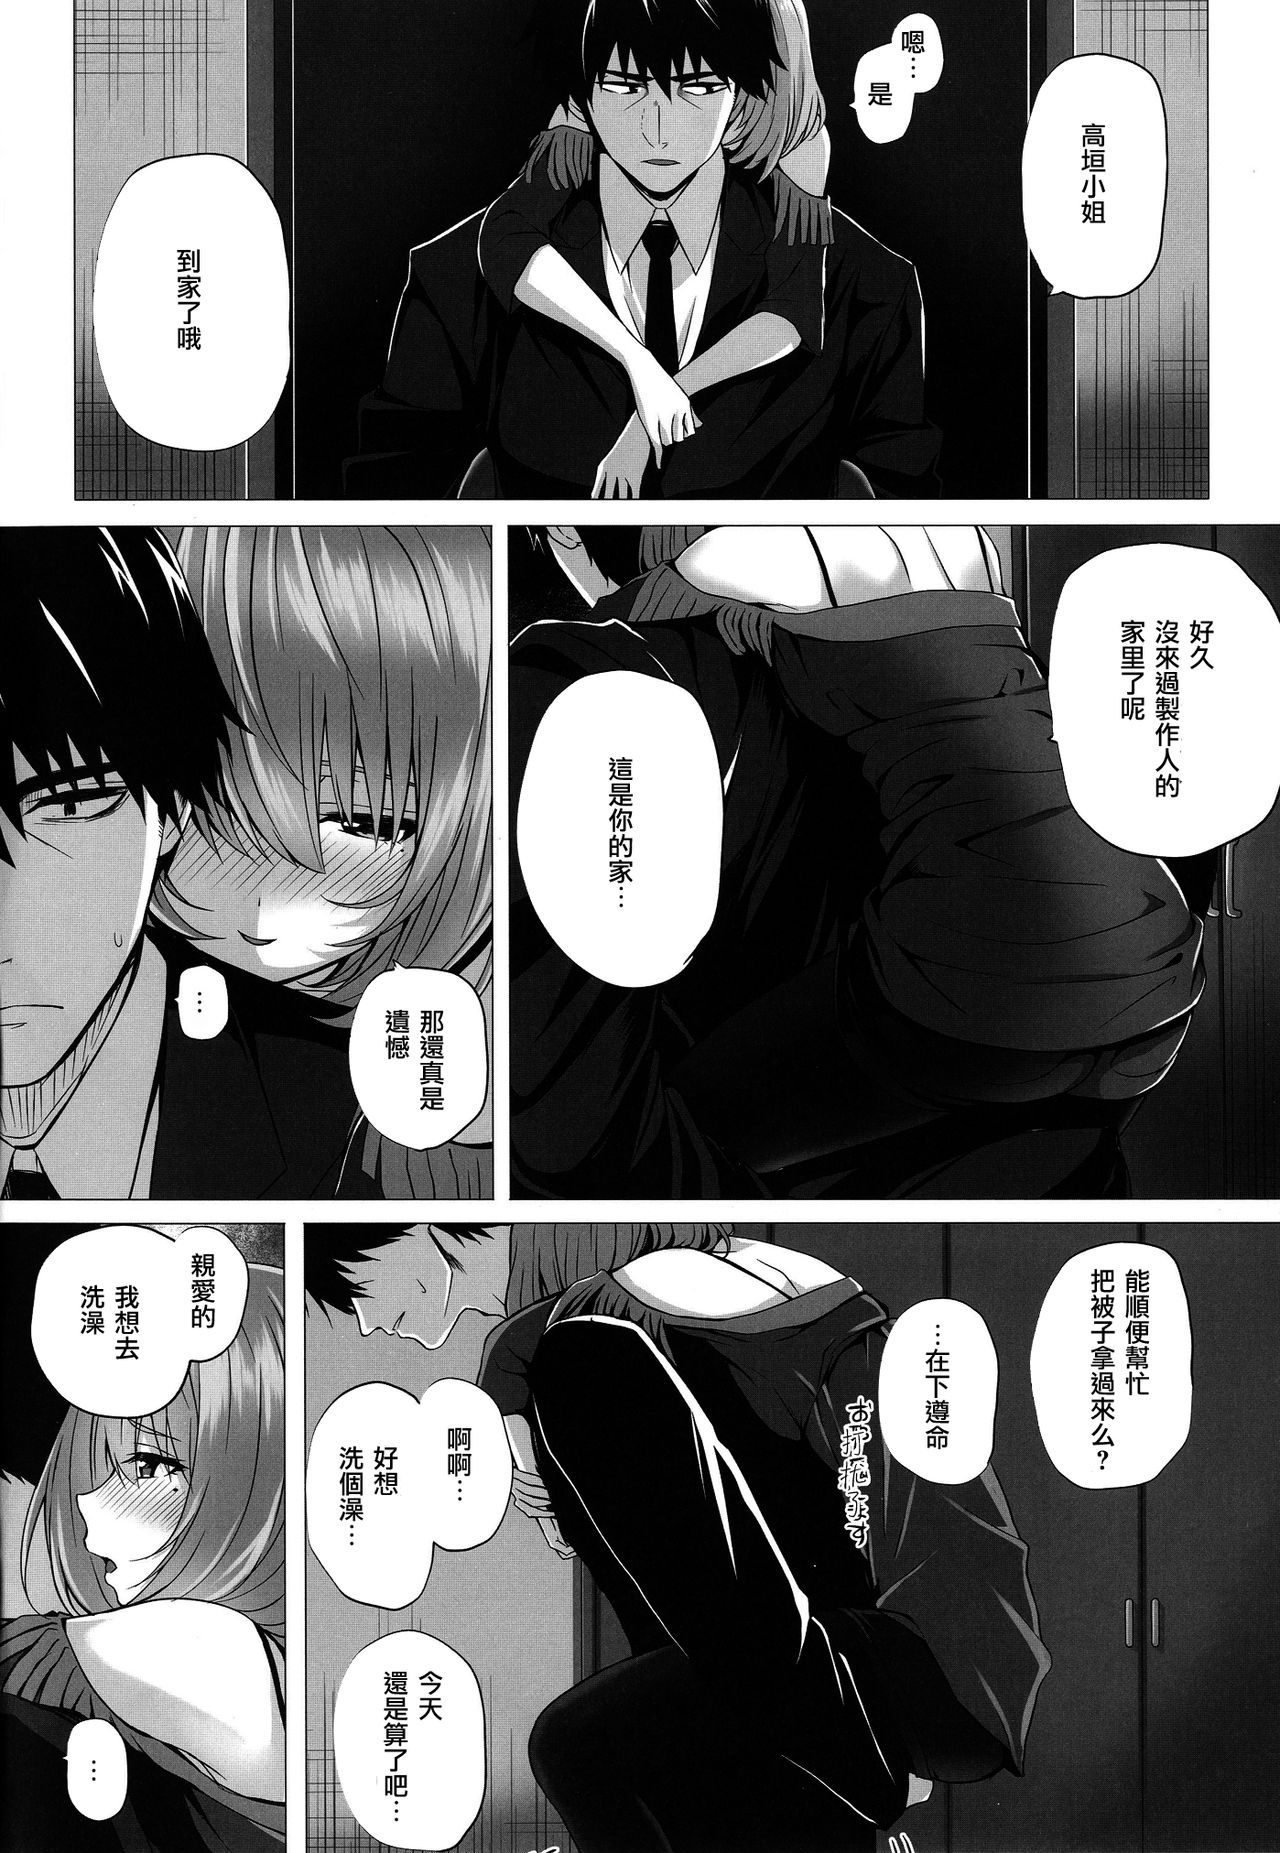 (C90) [N.S Craft (Simon)] Kaede to P (THE IDOLM@STER CINDERELLA GIRLS) [Chinese] [无毒汉化组] page 6 full